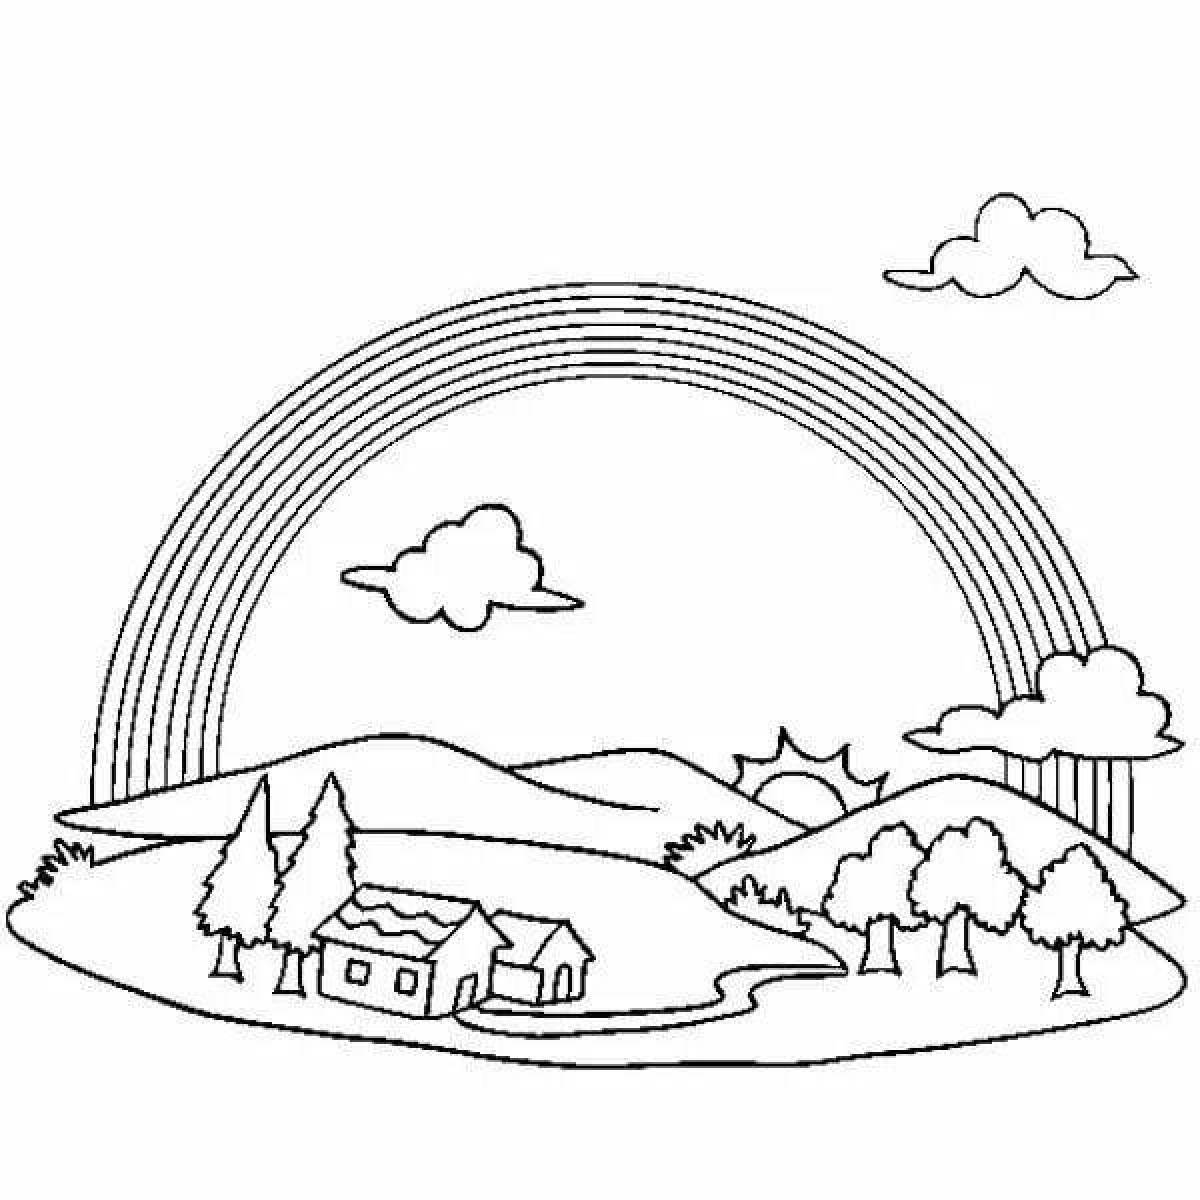 Coloring page my homeland shines